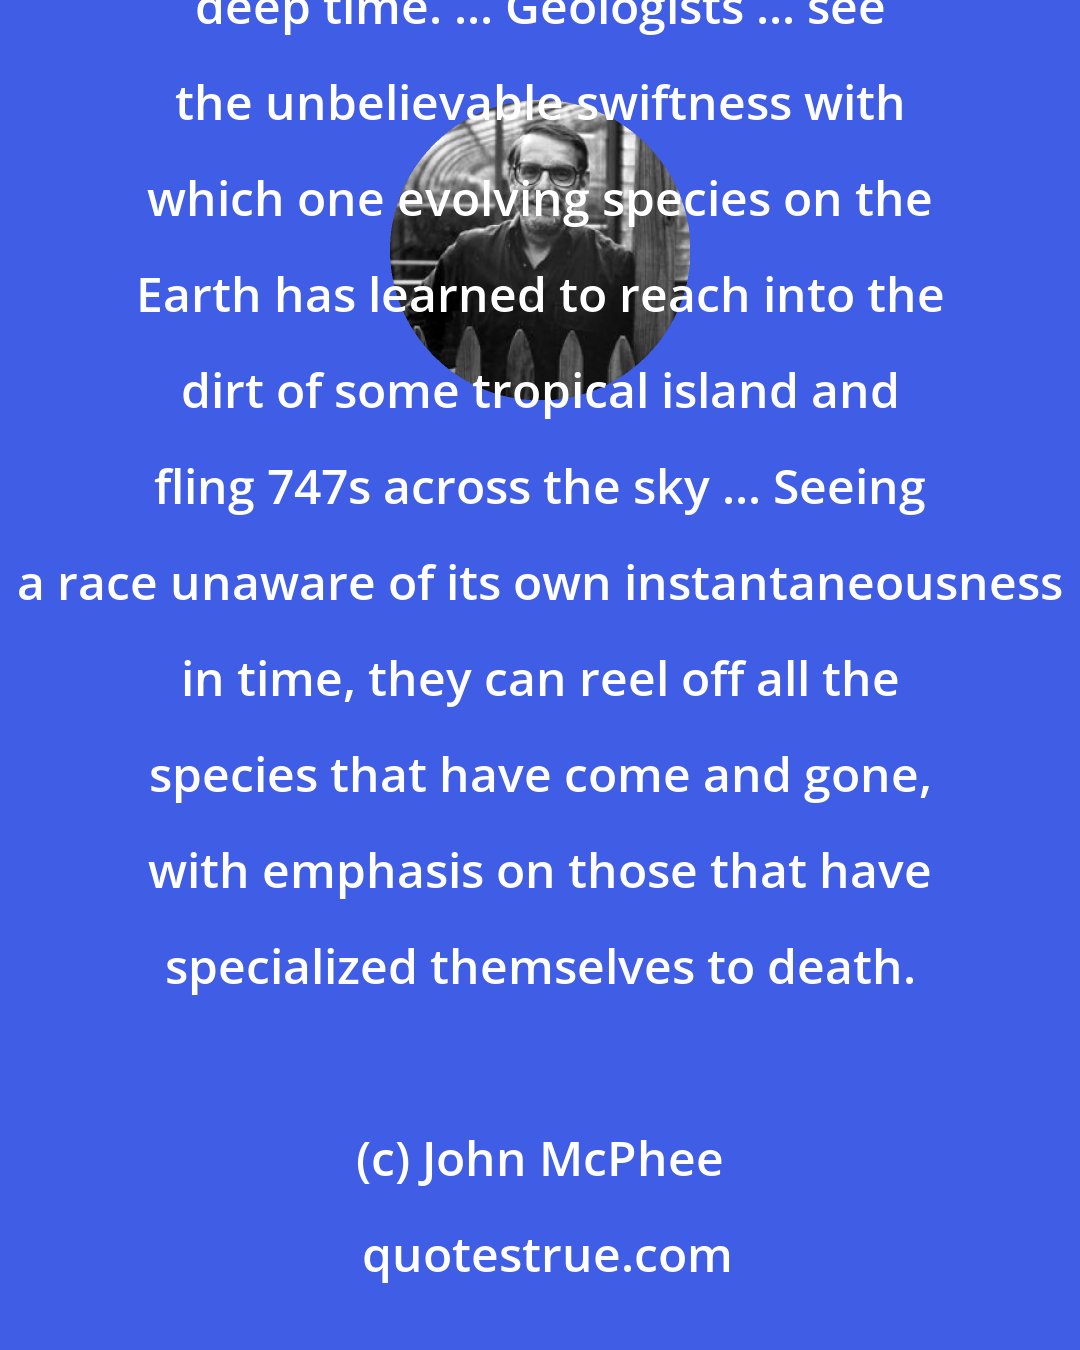 John McPhee: On the geological time scale, a human lifetime is reduced to a brevity that is too inhibiting to think about deep time. ... Geologists ... see the unbelievable swiftness with which one evolving species on the Earth has learned to reach into the dirt of some tropical island and fling 747s across the sky ... Seeing a race unaware of its own instantaneousness in time, they can reel off all the species that have come and gone, with emphasis on those that have specialized themselves to death.